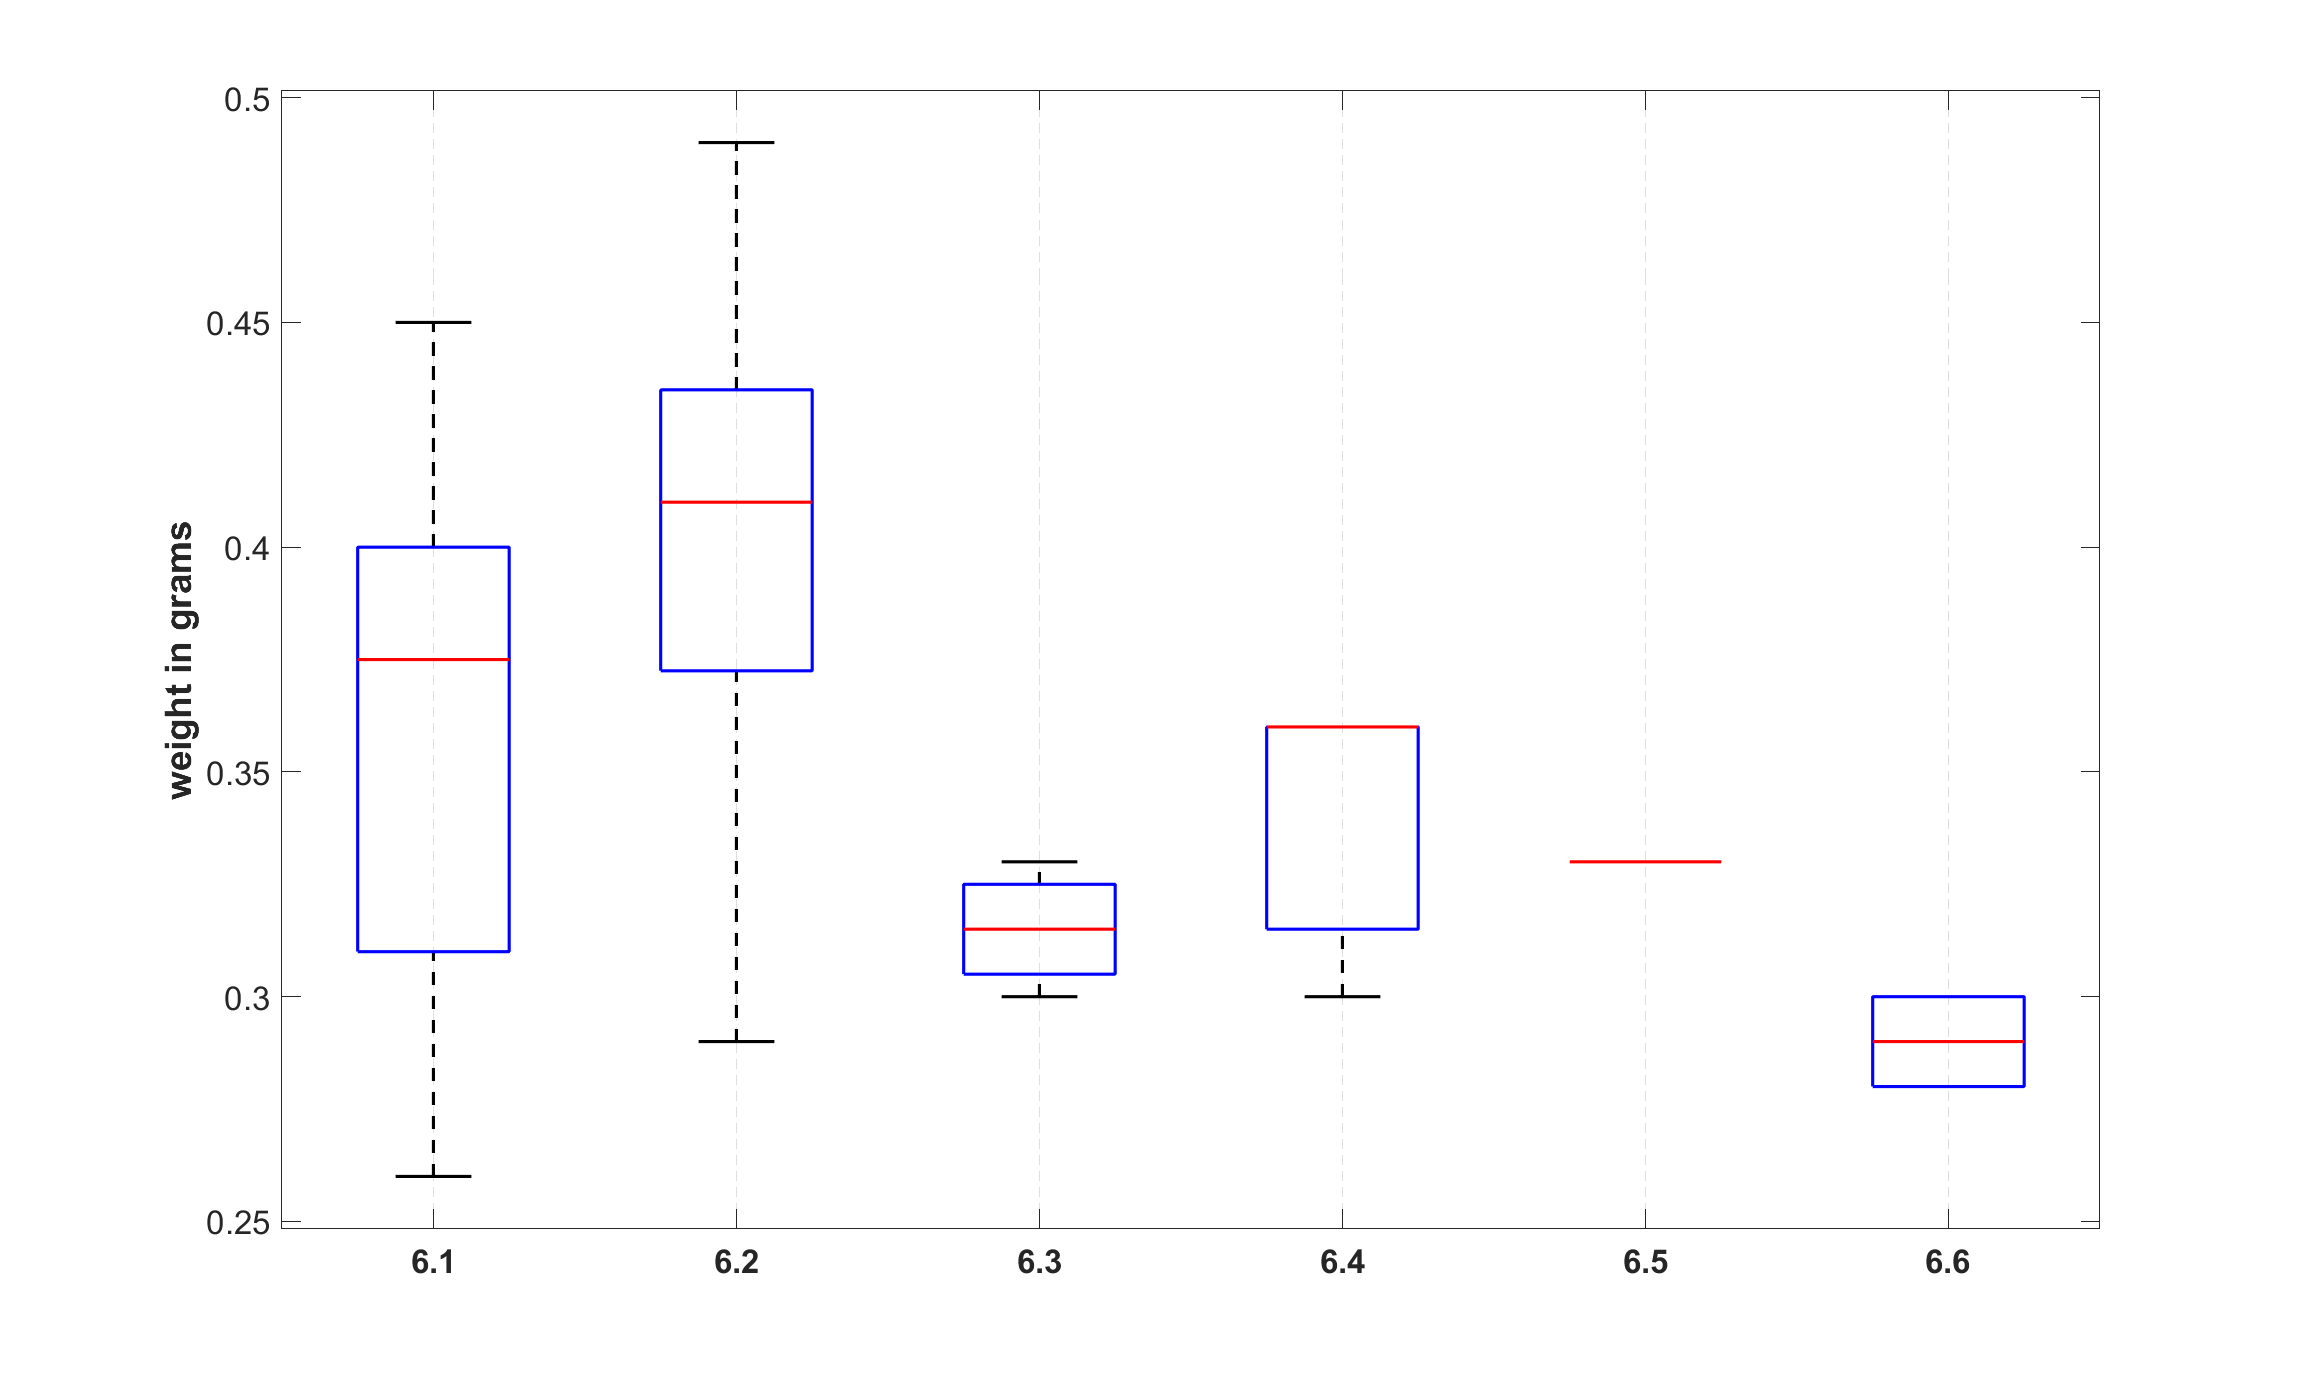 Figure 1: Box plots of individual coin types